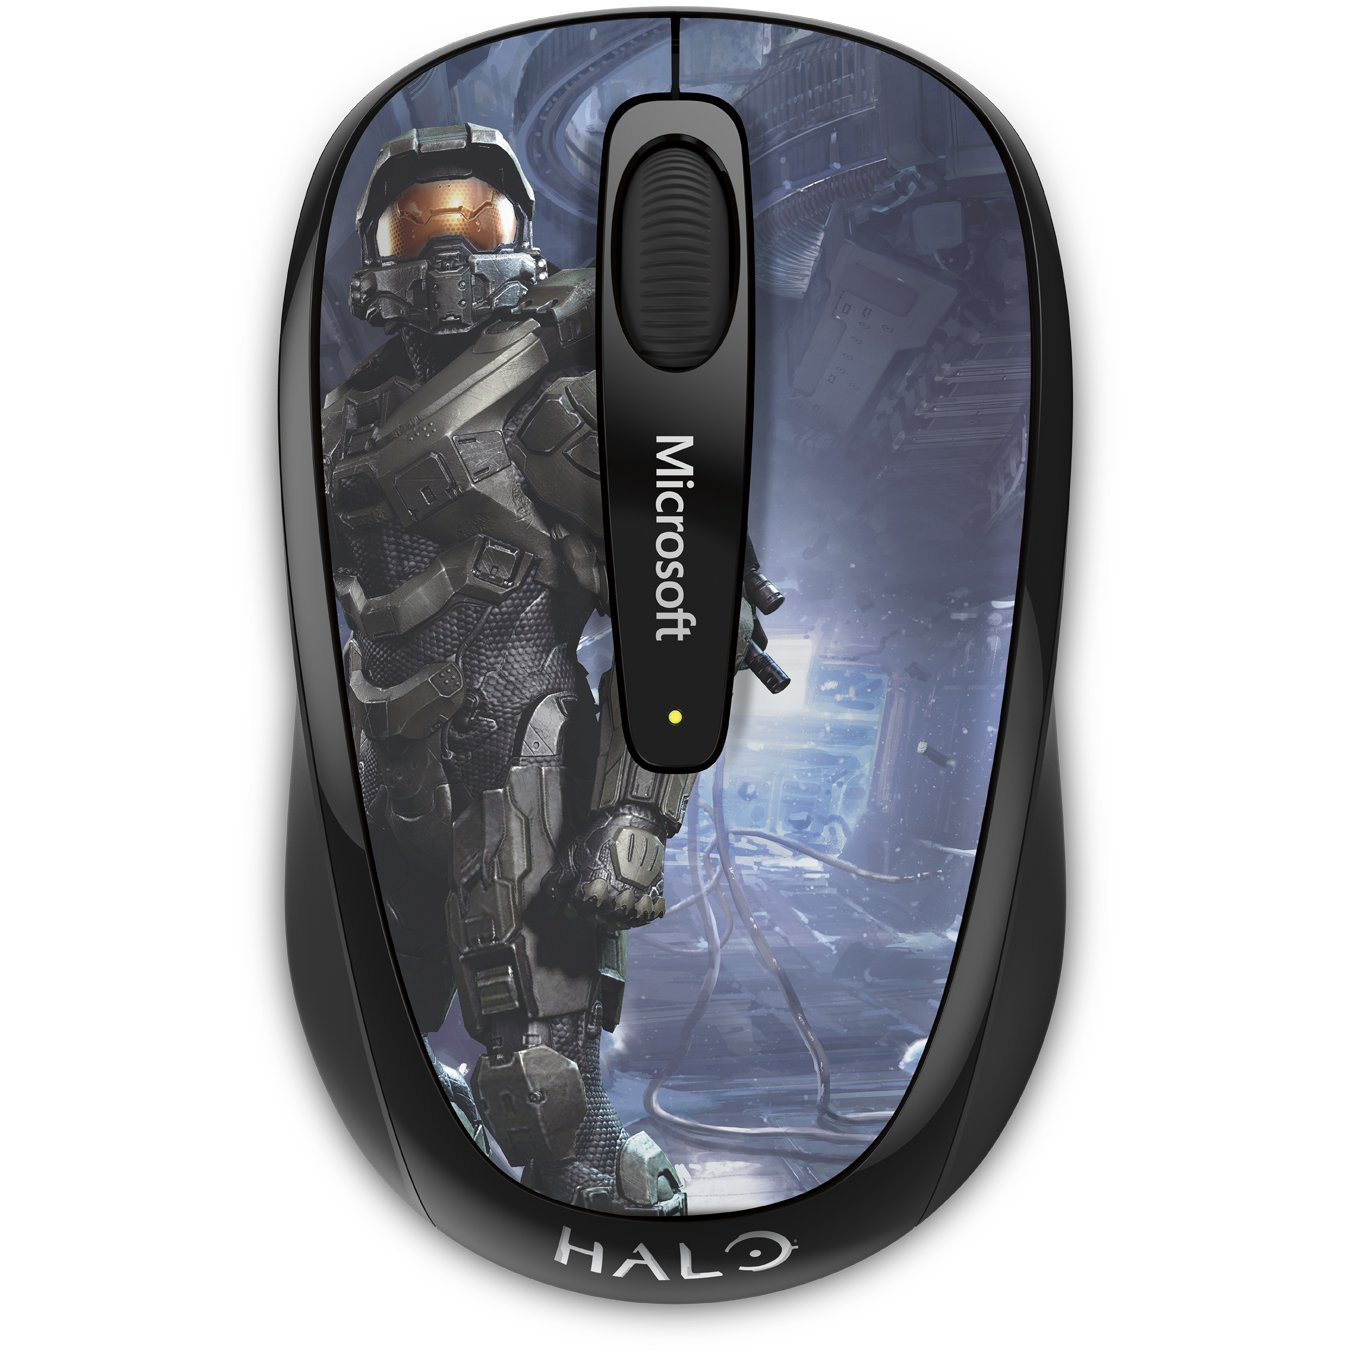  Mouse wireless Microsoft 3500 Halo Limited Edition 